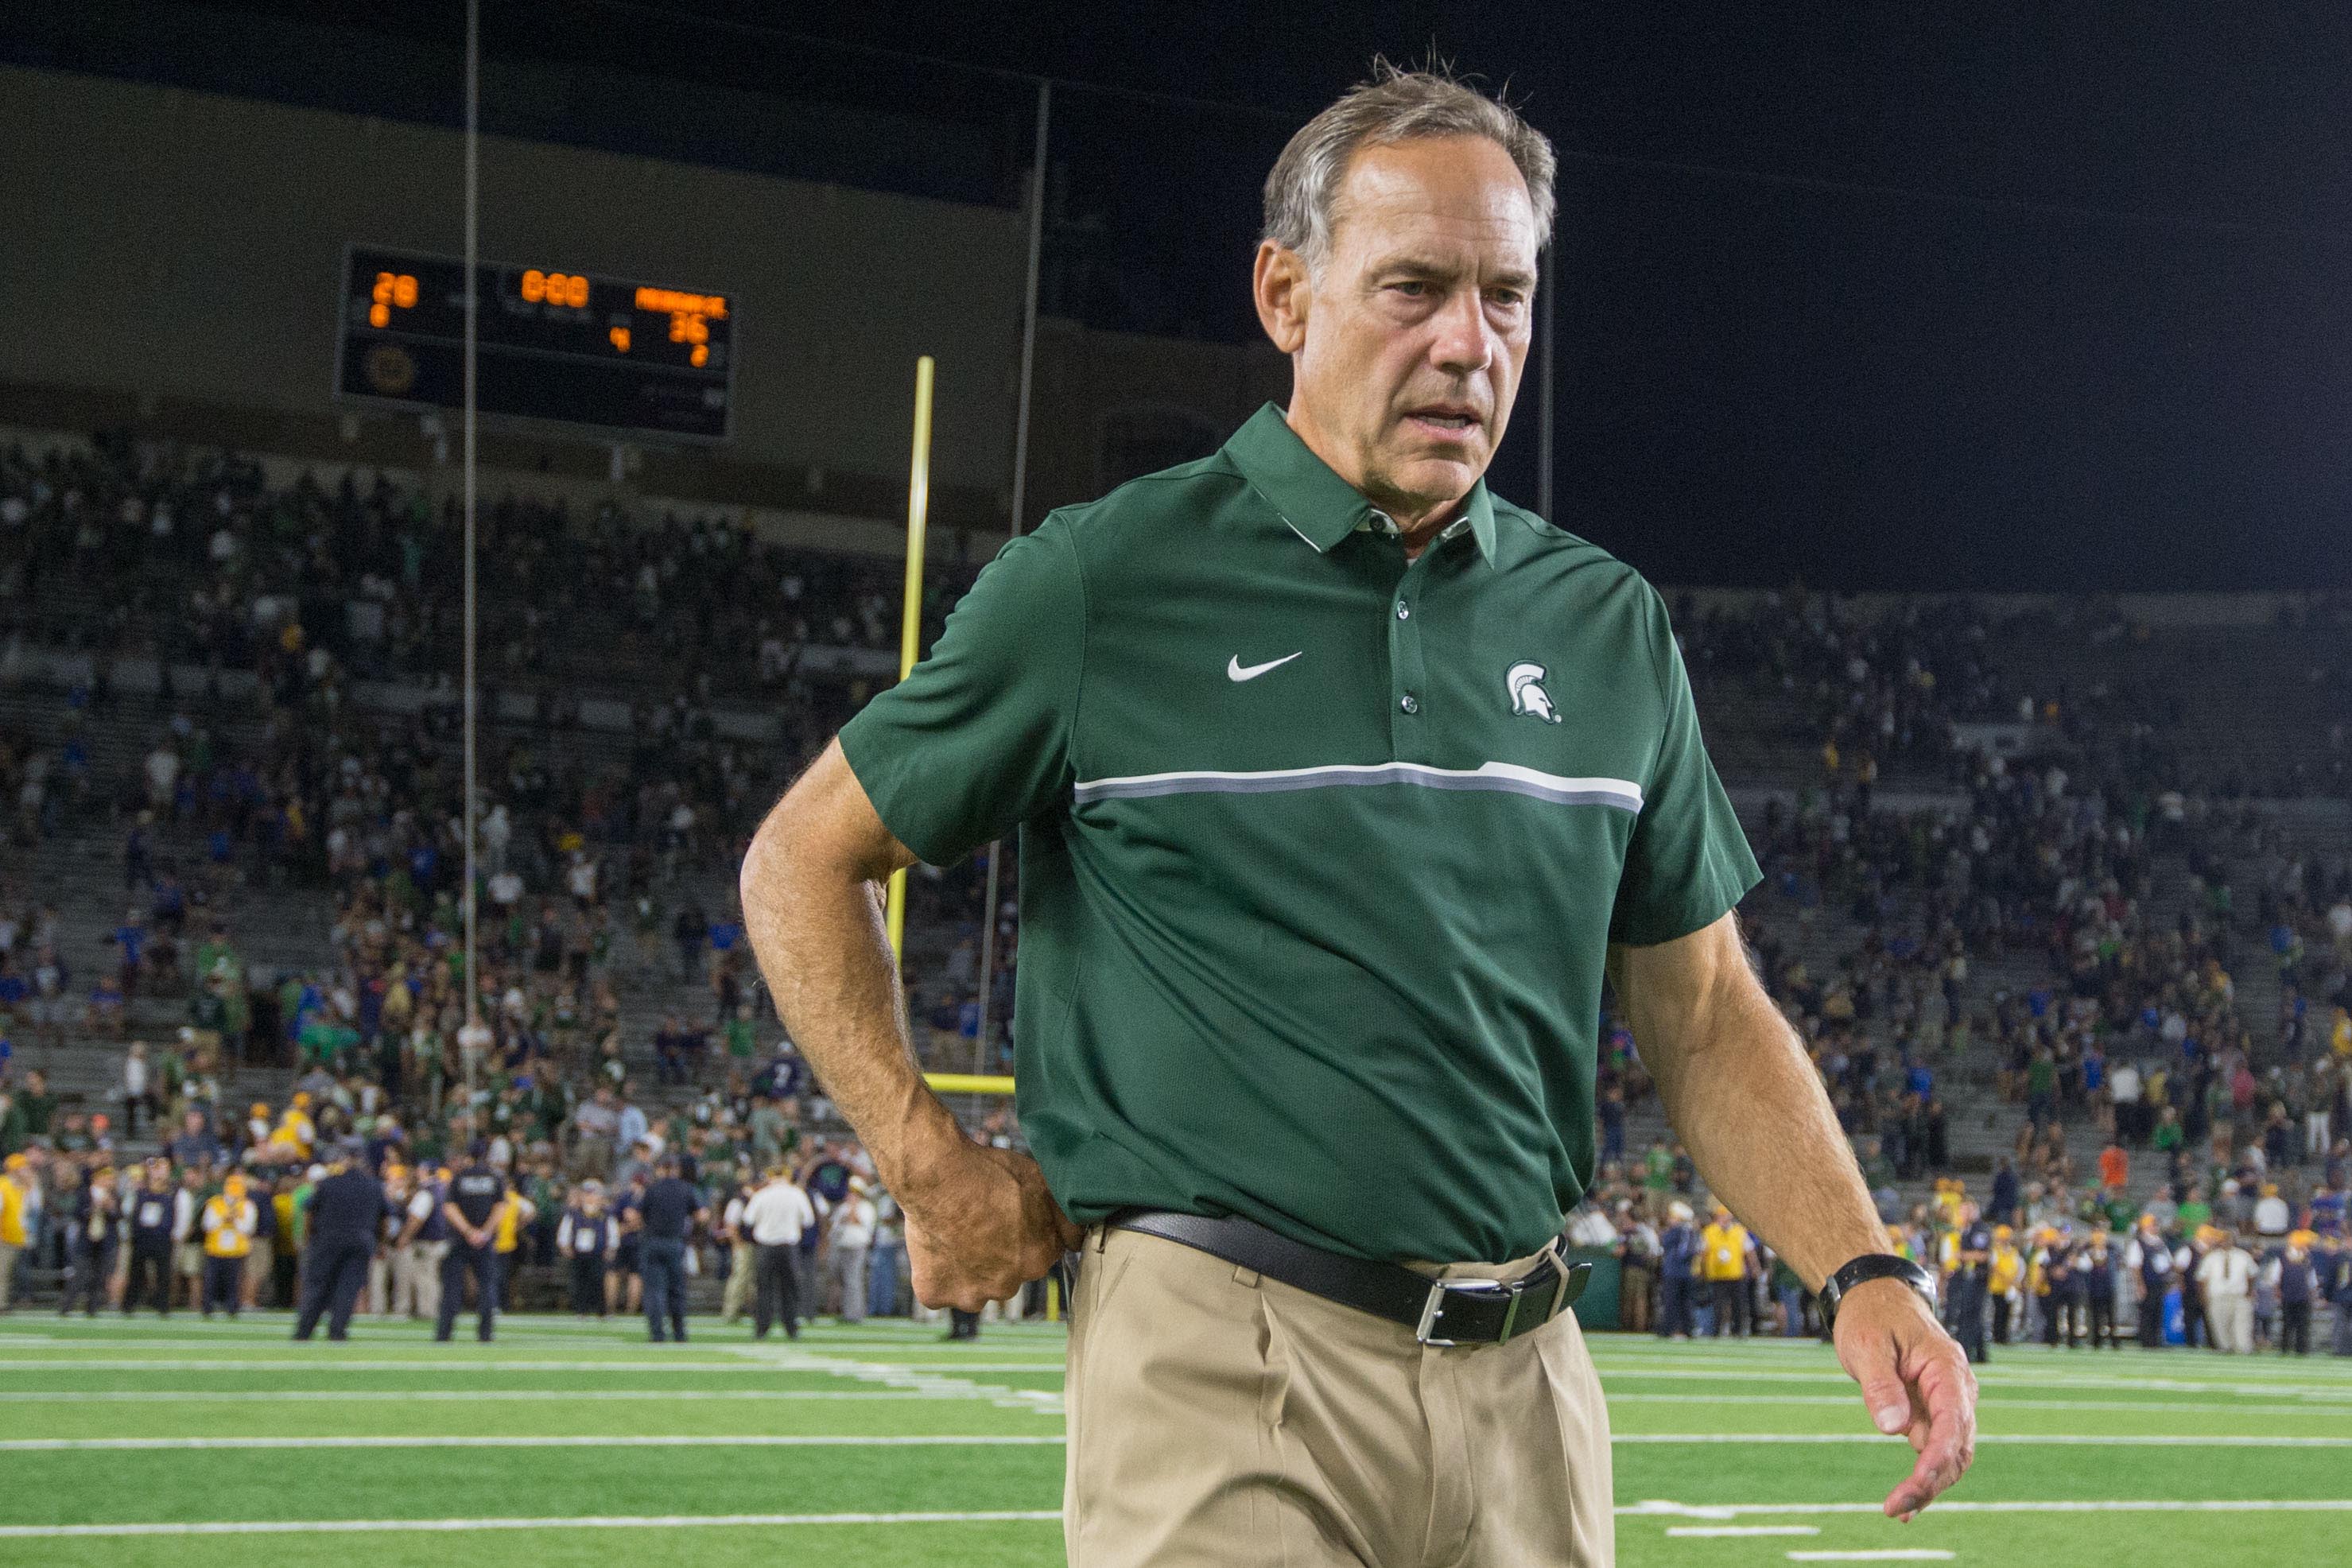 Sep 17, 2016; South Bend, IN, USA; Michigan State Spartans head coach Mark Dantonio leaves the field after MSU defeated the Notre Dame Fighting Irish 36-28 at Notre Dame Stadium. Mandatory Credit: Matt Cashore-USA TODAY Sports